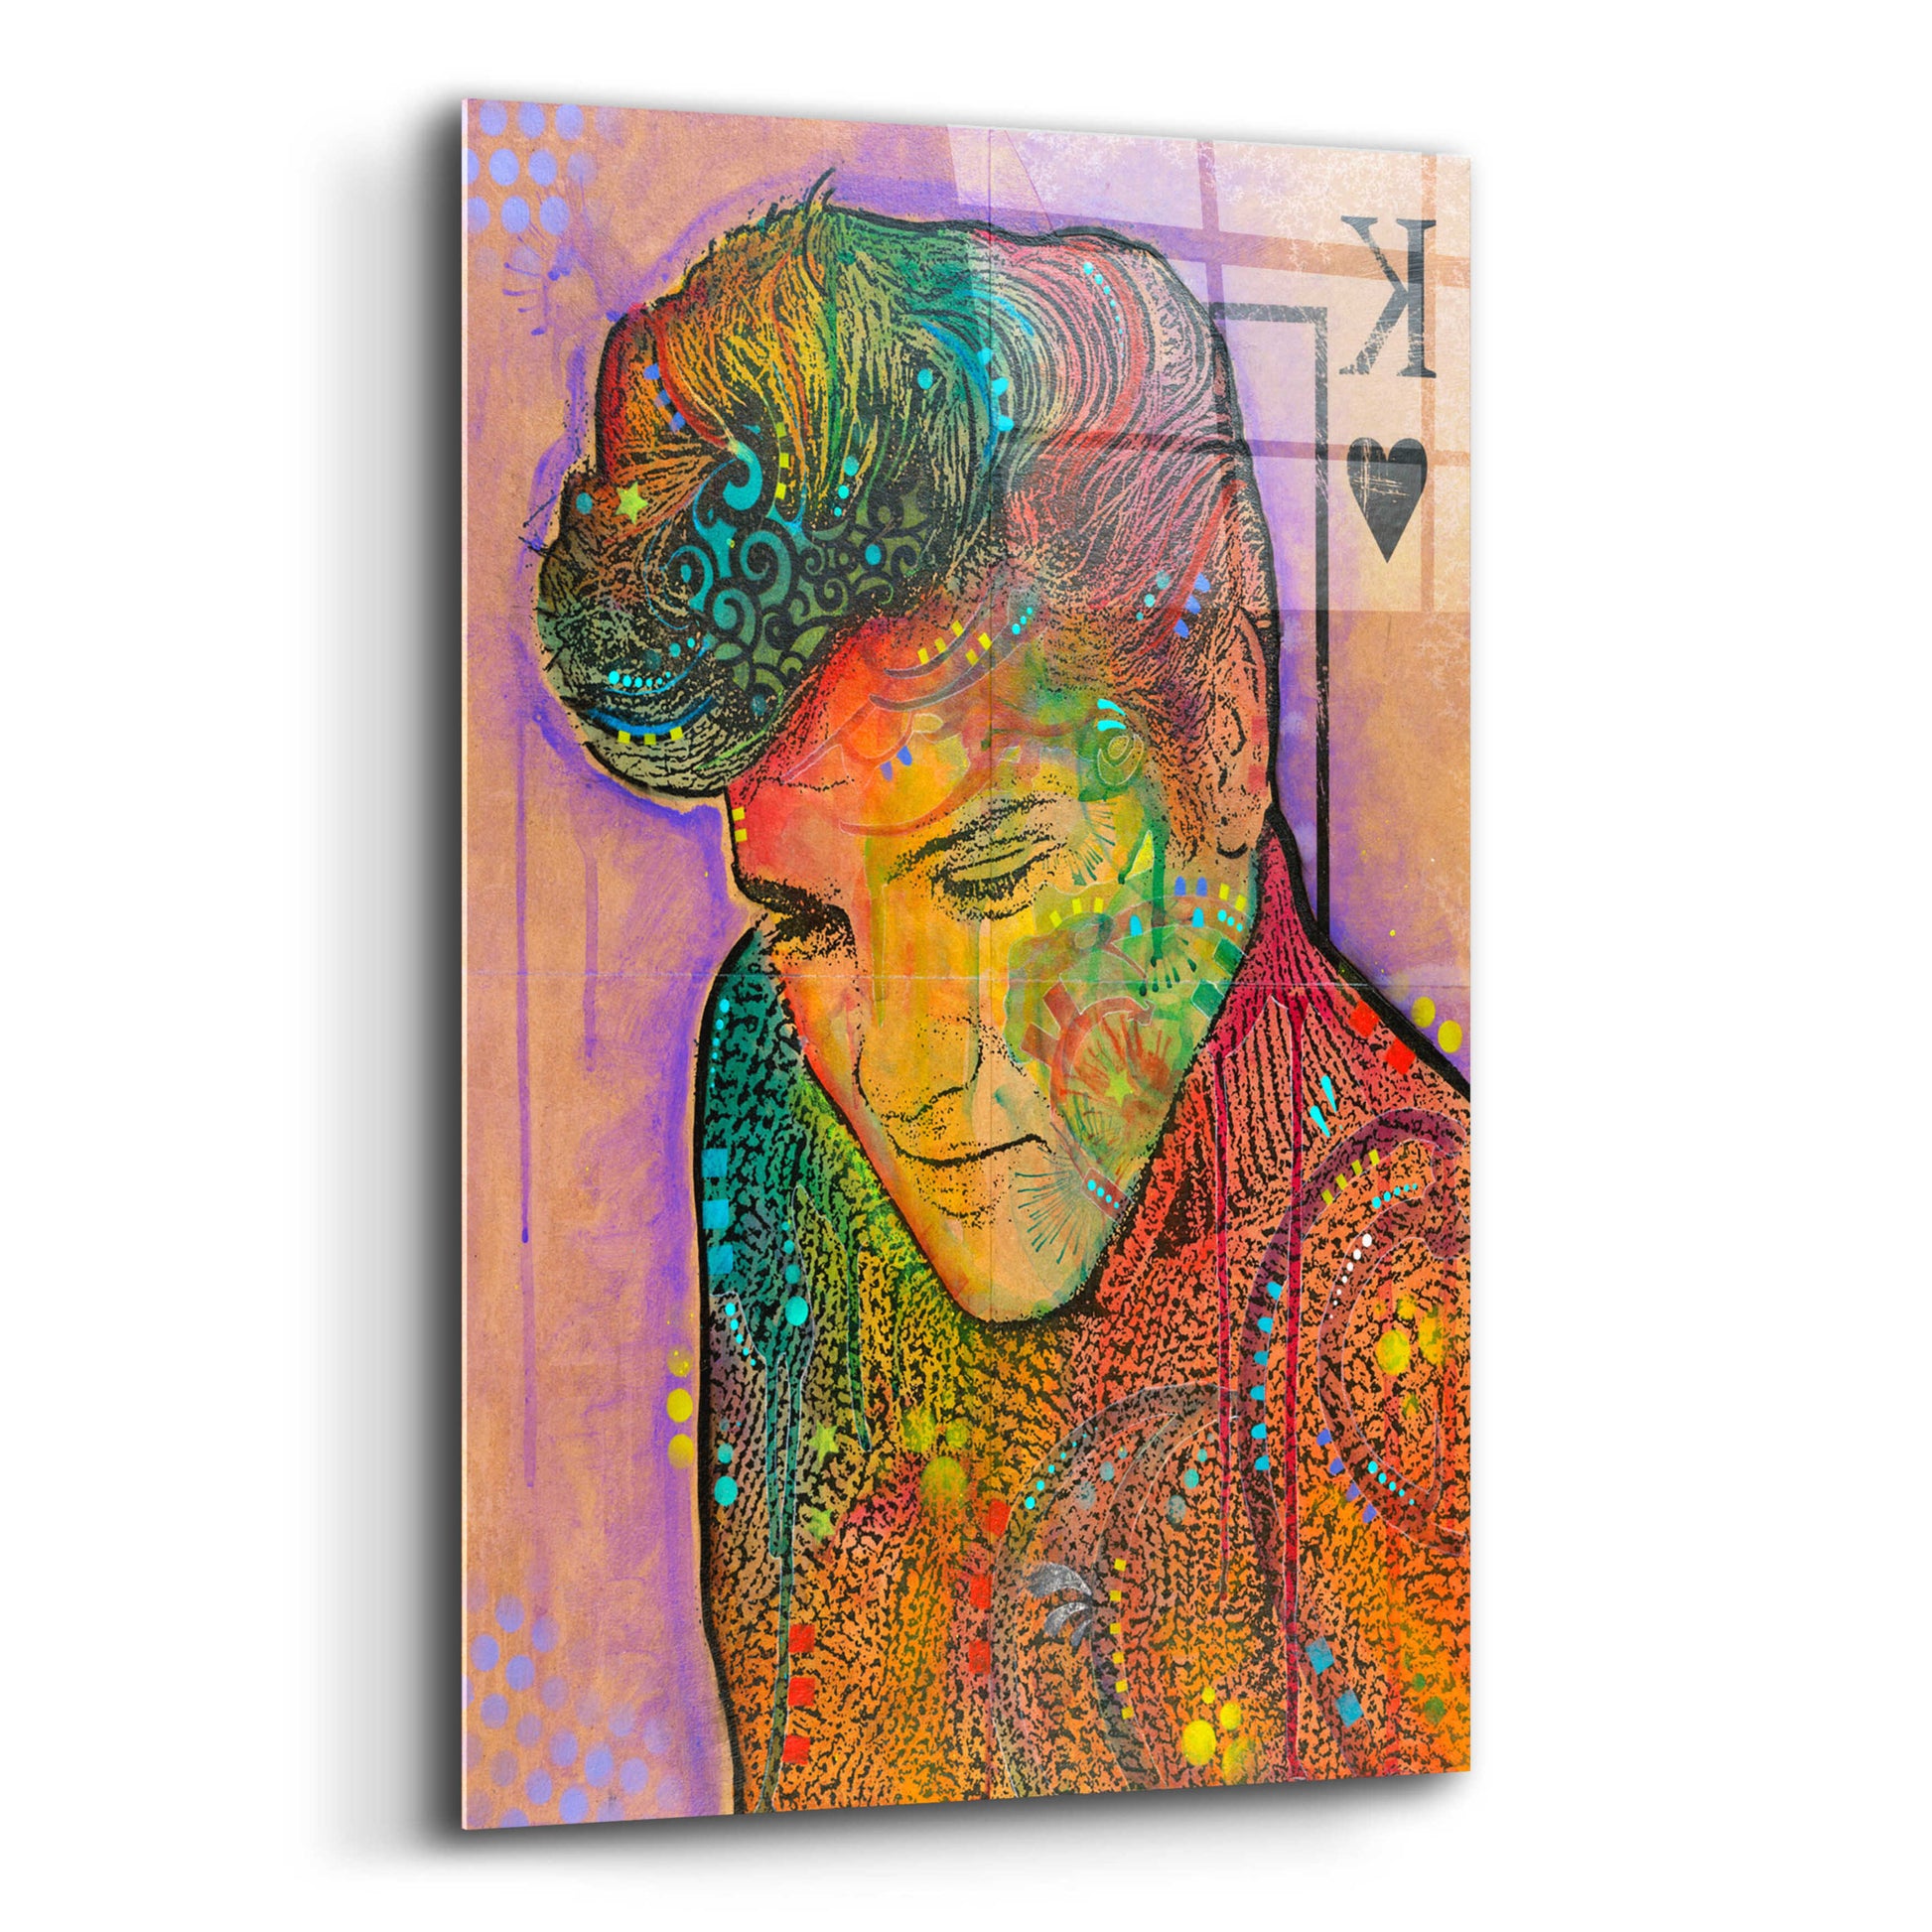 Epic Art 'Elvis - King of Hearts' by Dean Russo, Acrylic Glass Wall Art,16x24